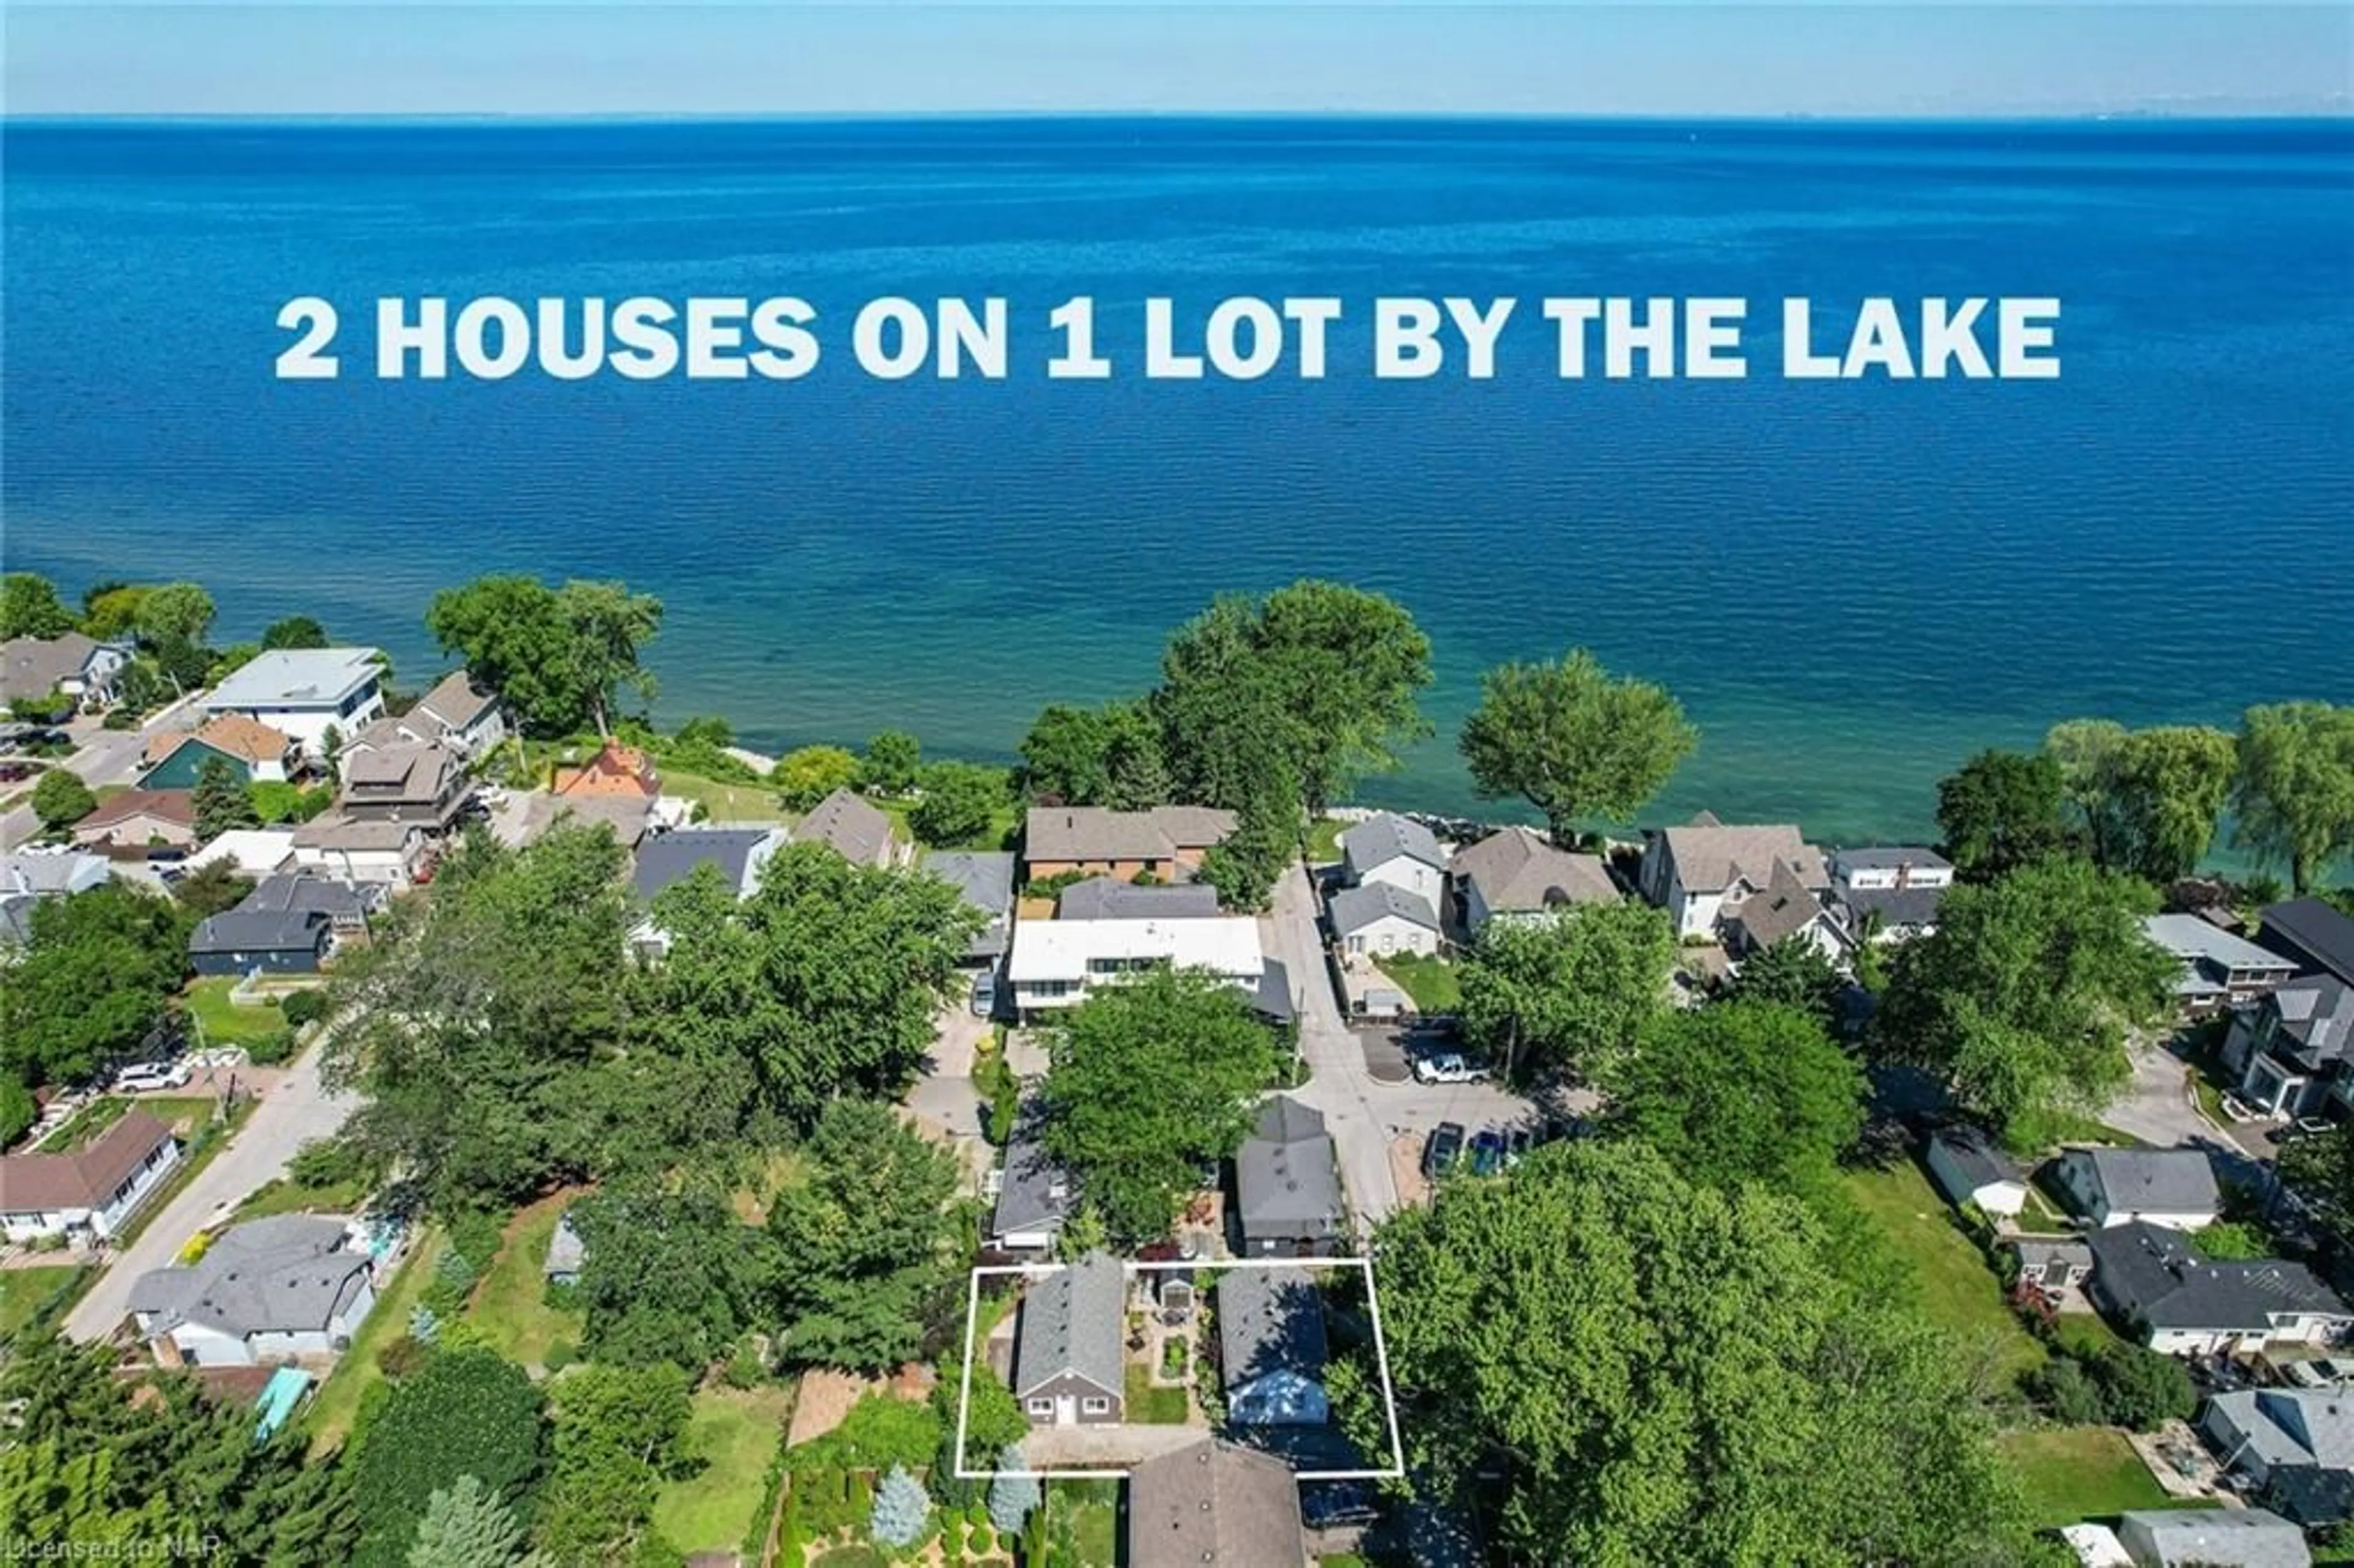 Lakeview for 5-5 1/2 Abbey Ave, St. Catharines Ontario L2N 5J3